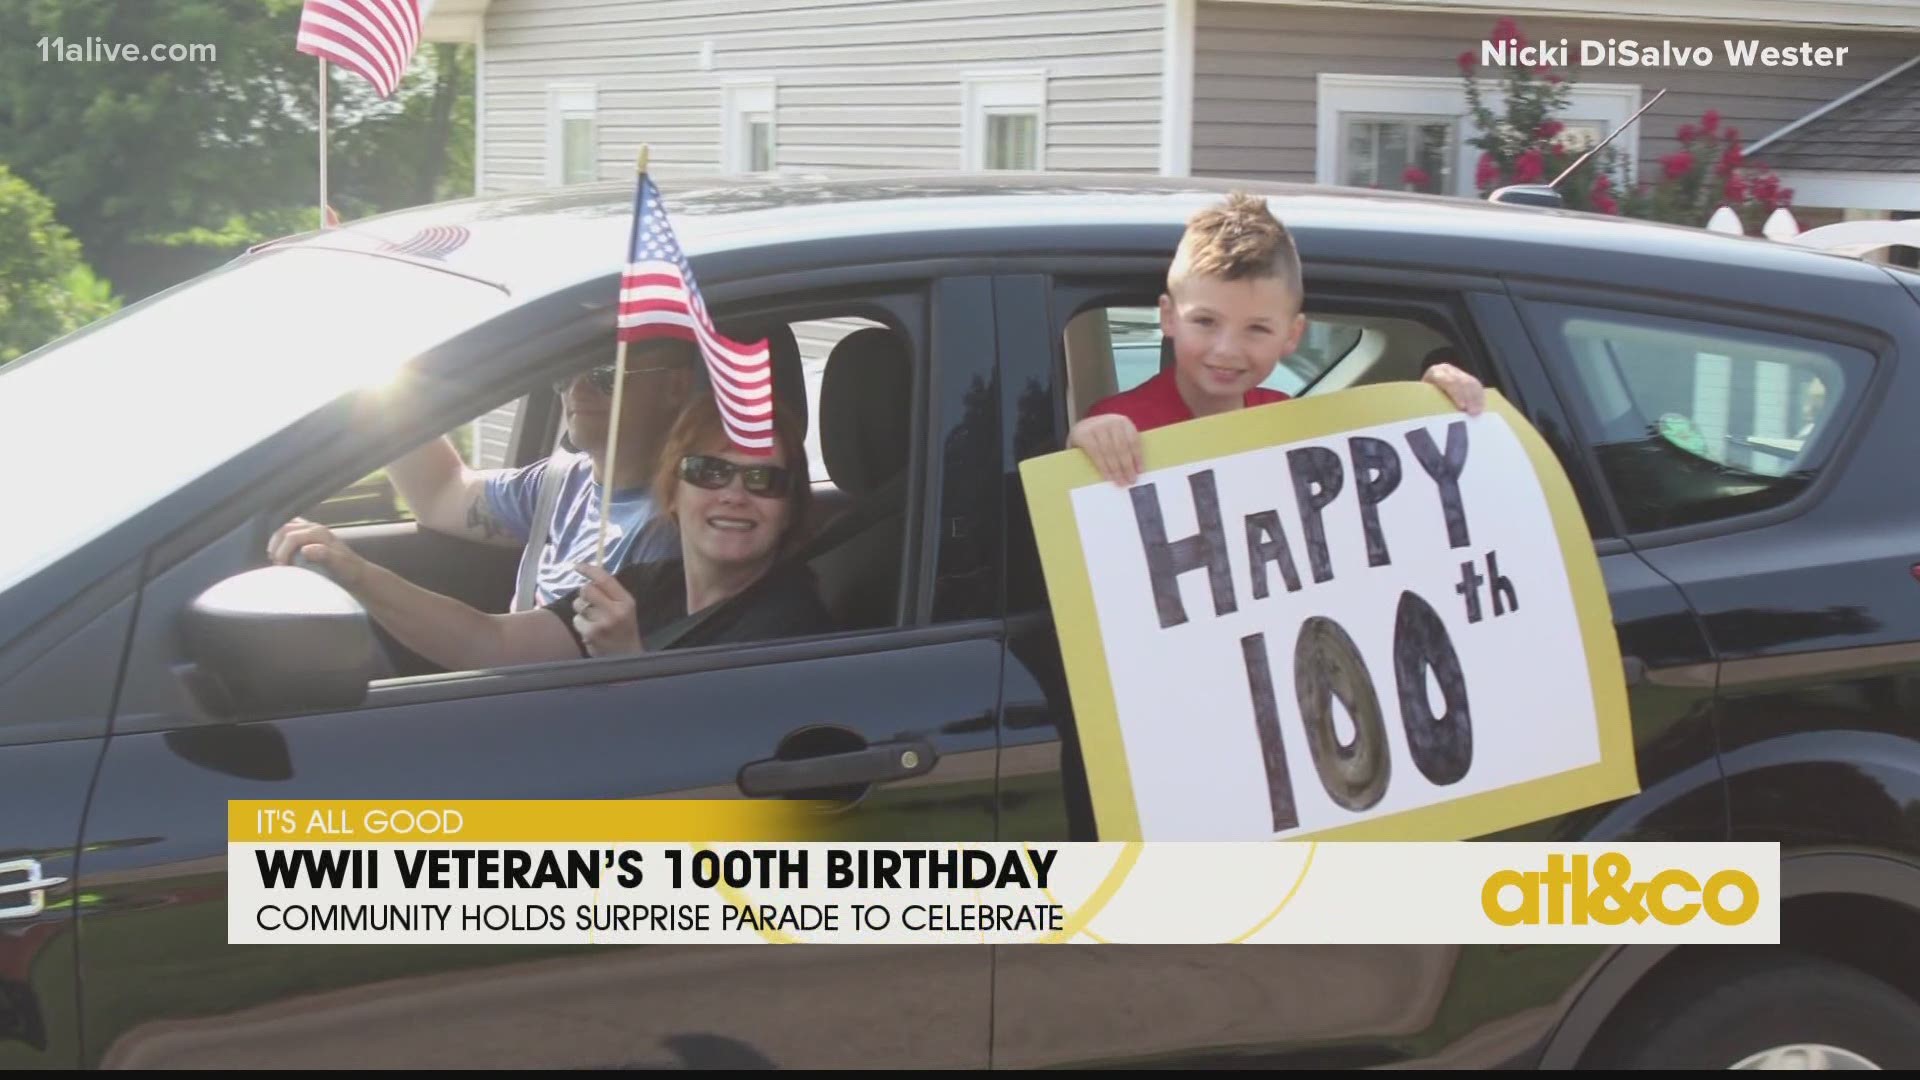 A community came together for a surprise parade to celebrate their veteran neighbor's big birthday.